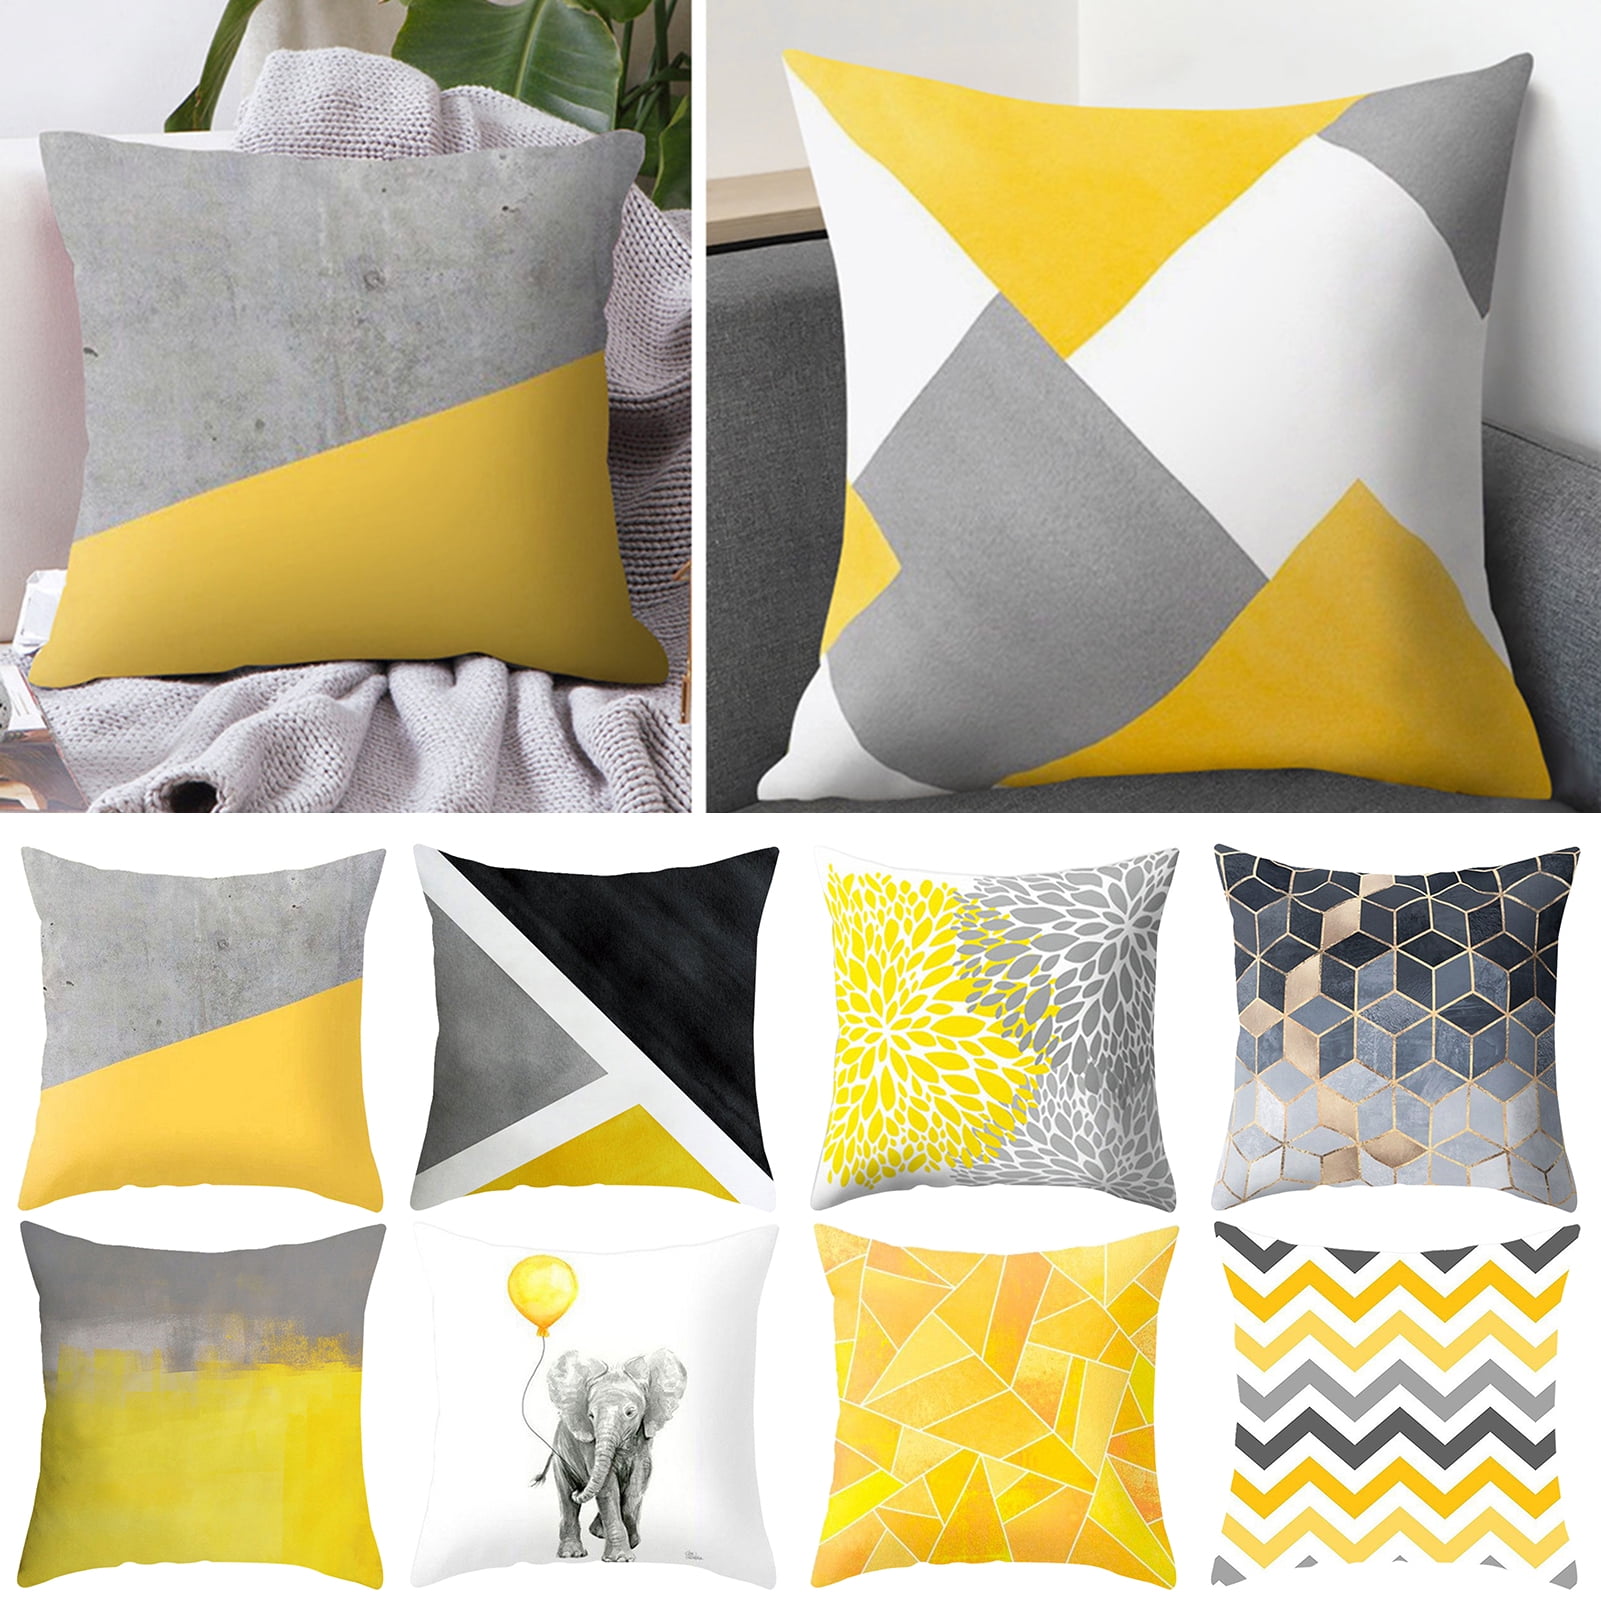 Details about   Set of 5 Black Abstract Digital Print Cushion Cover Square Shape With Zipper 